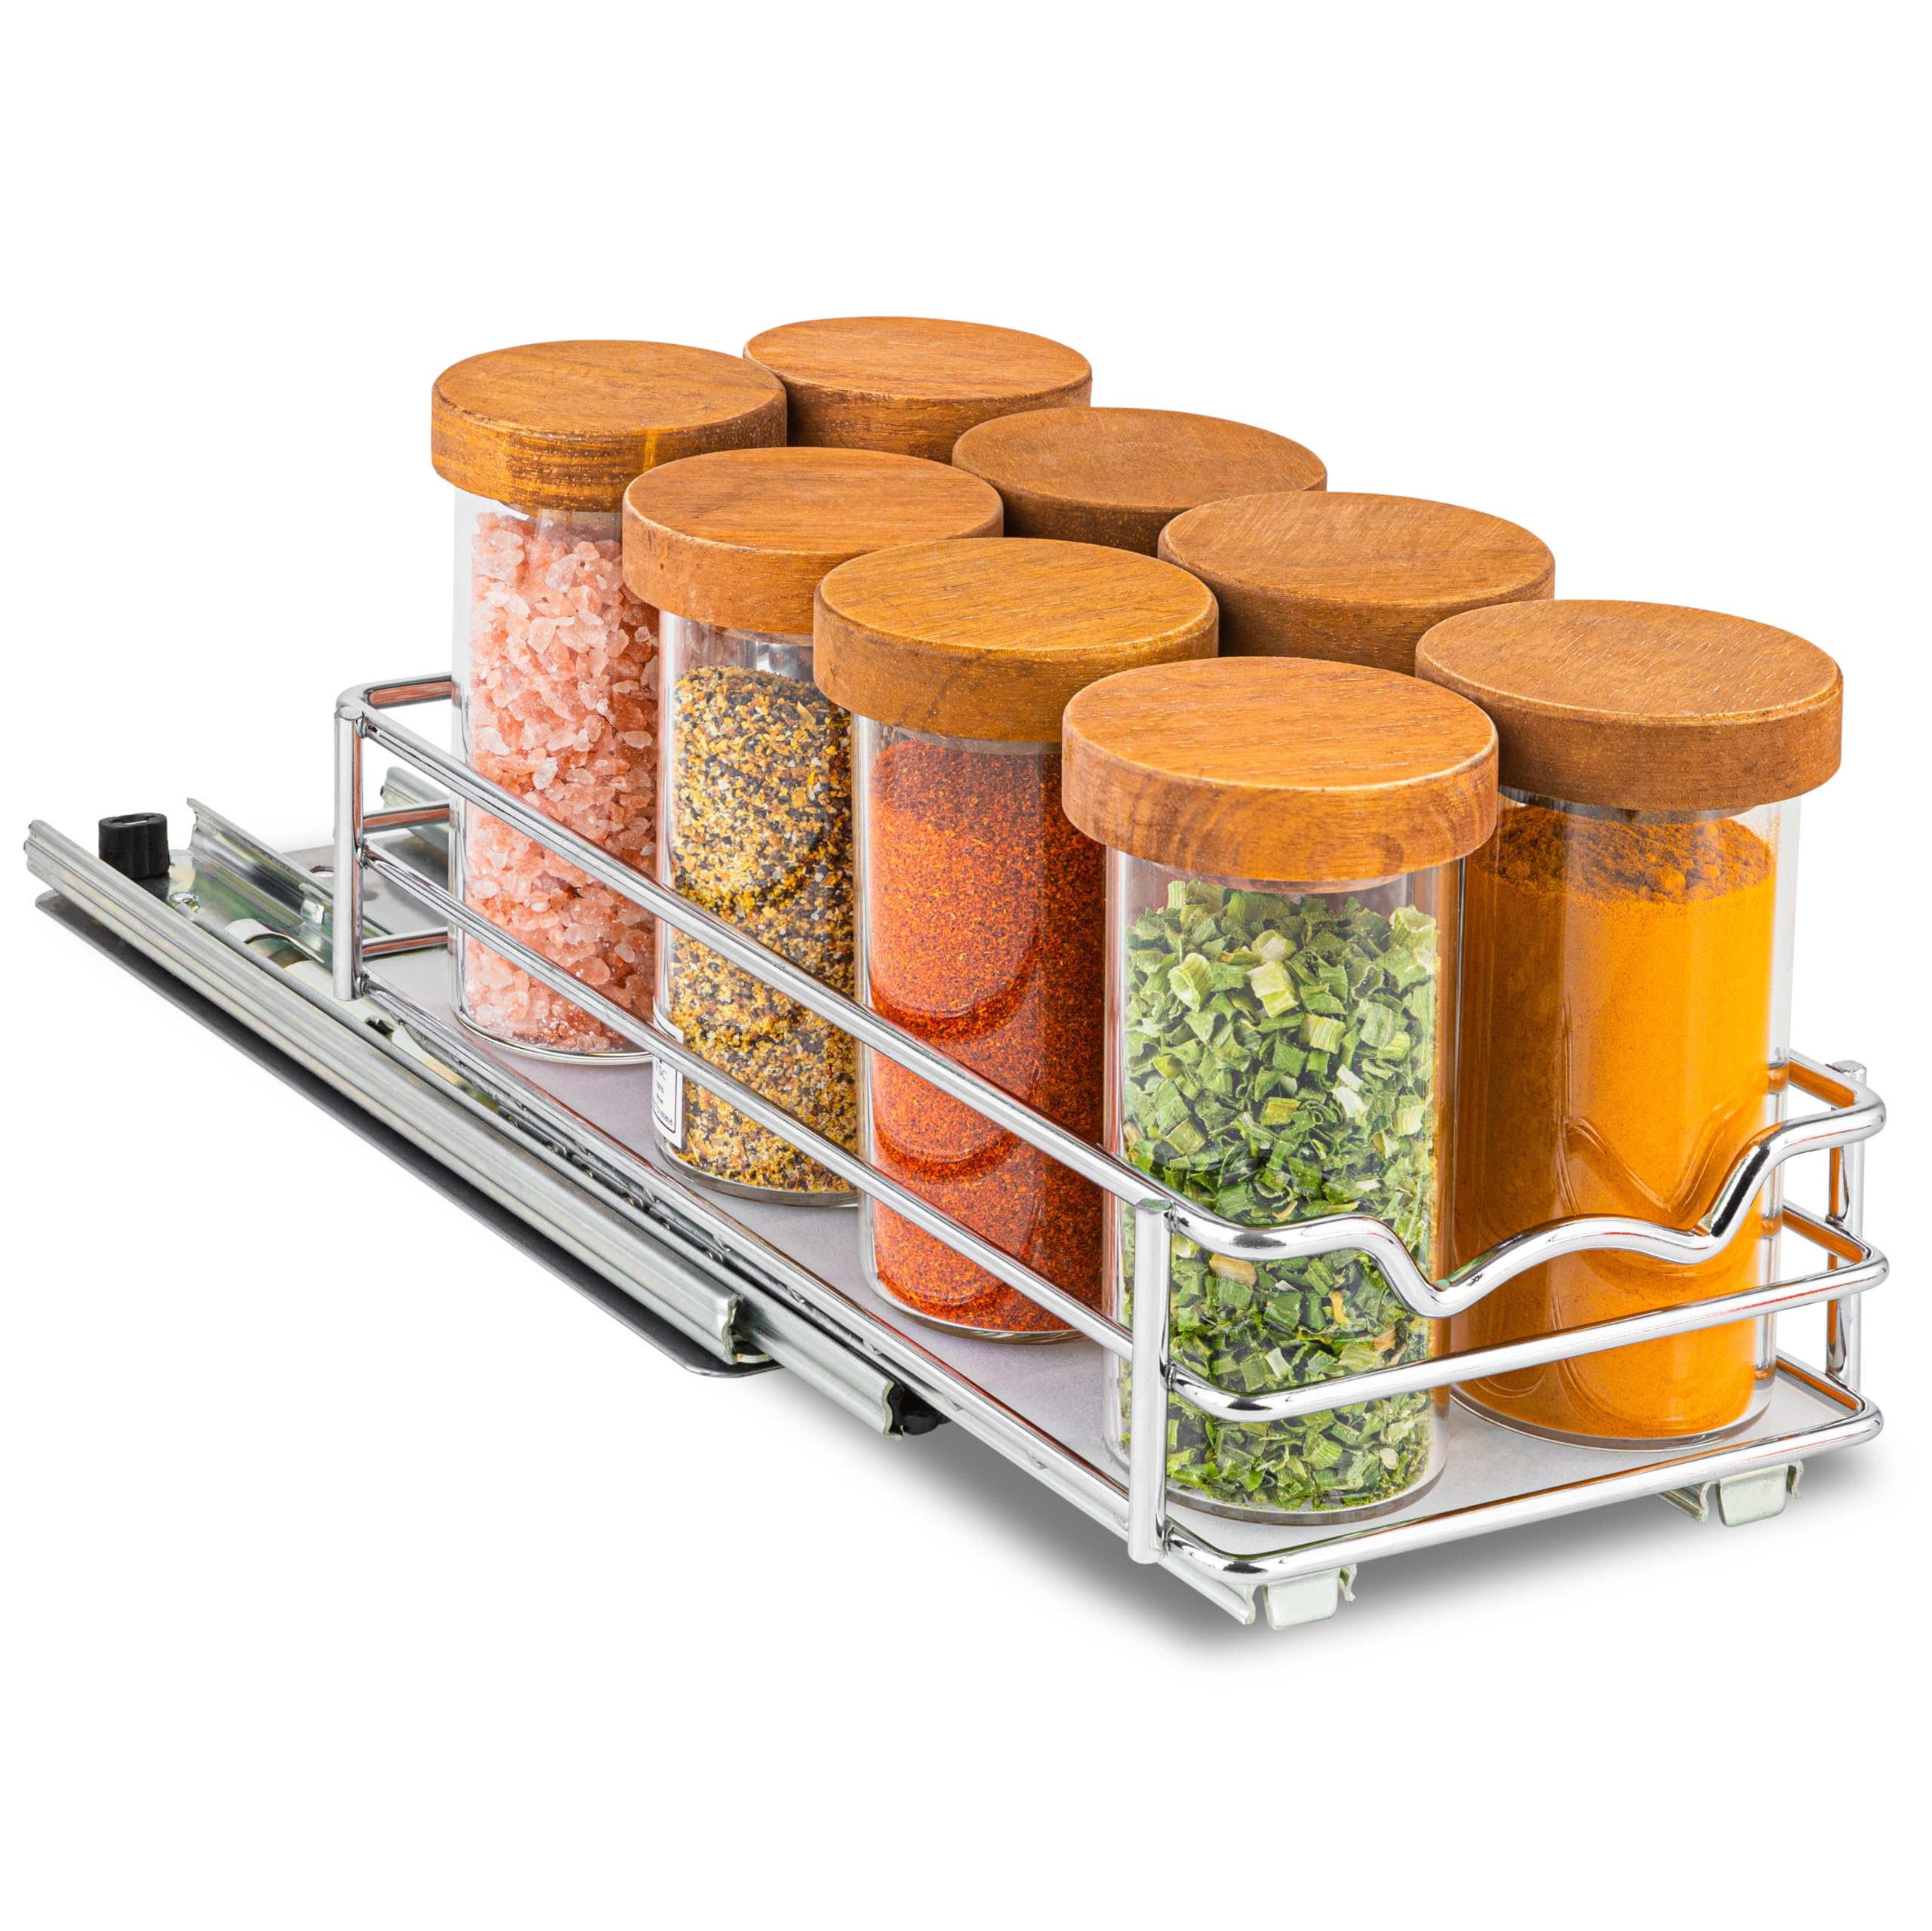 HOLD N' STORAGE Premium Pull-Out Spice Rack - Anti-Rust Chrome Finish - Heavy Duty with 5-Year Limited Warranty- Fits 2 Rows of Standard Spice Jars  - Like New